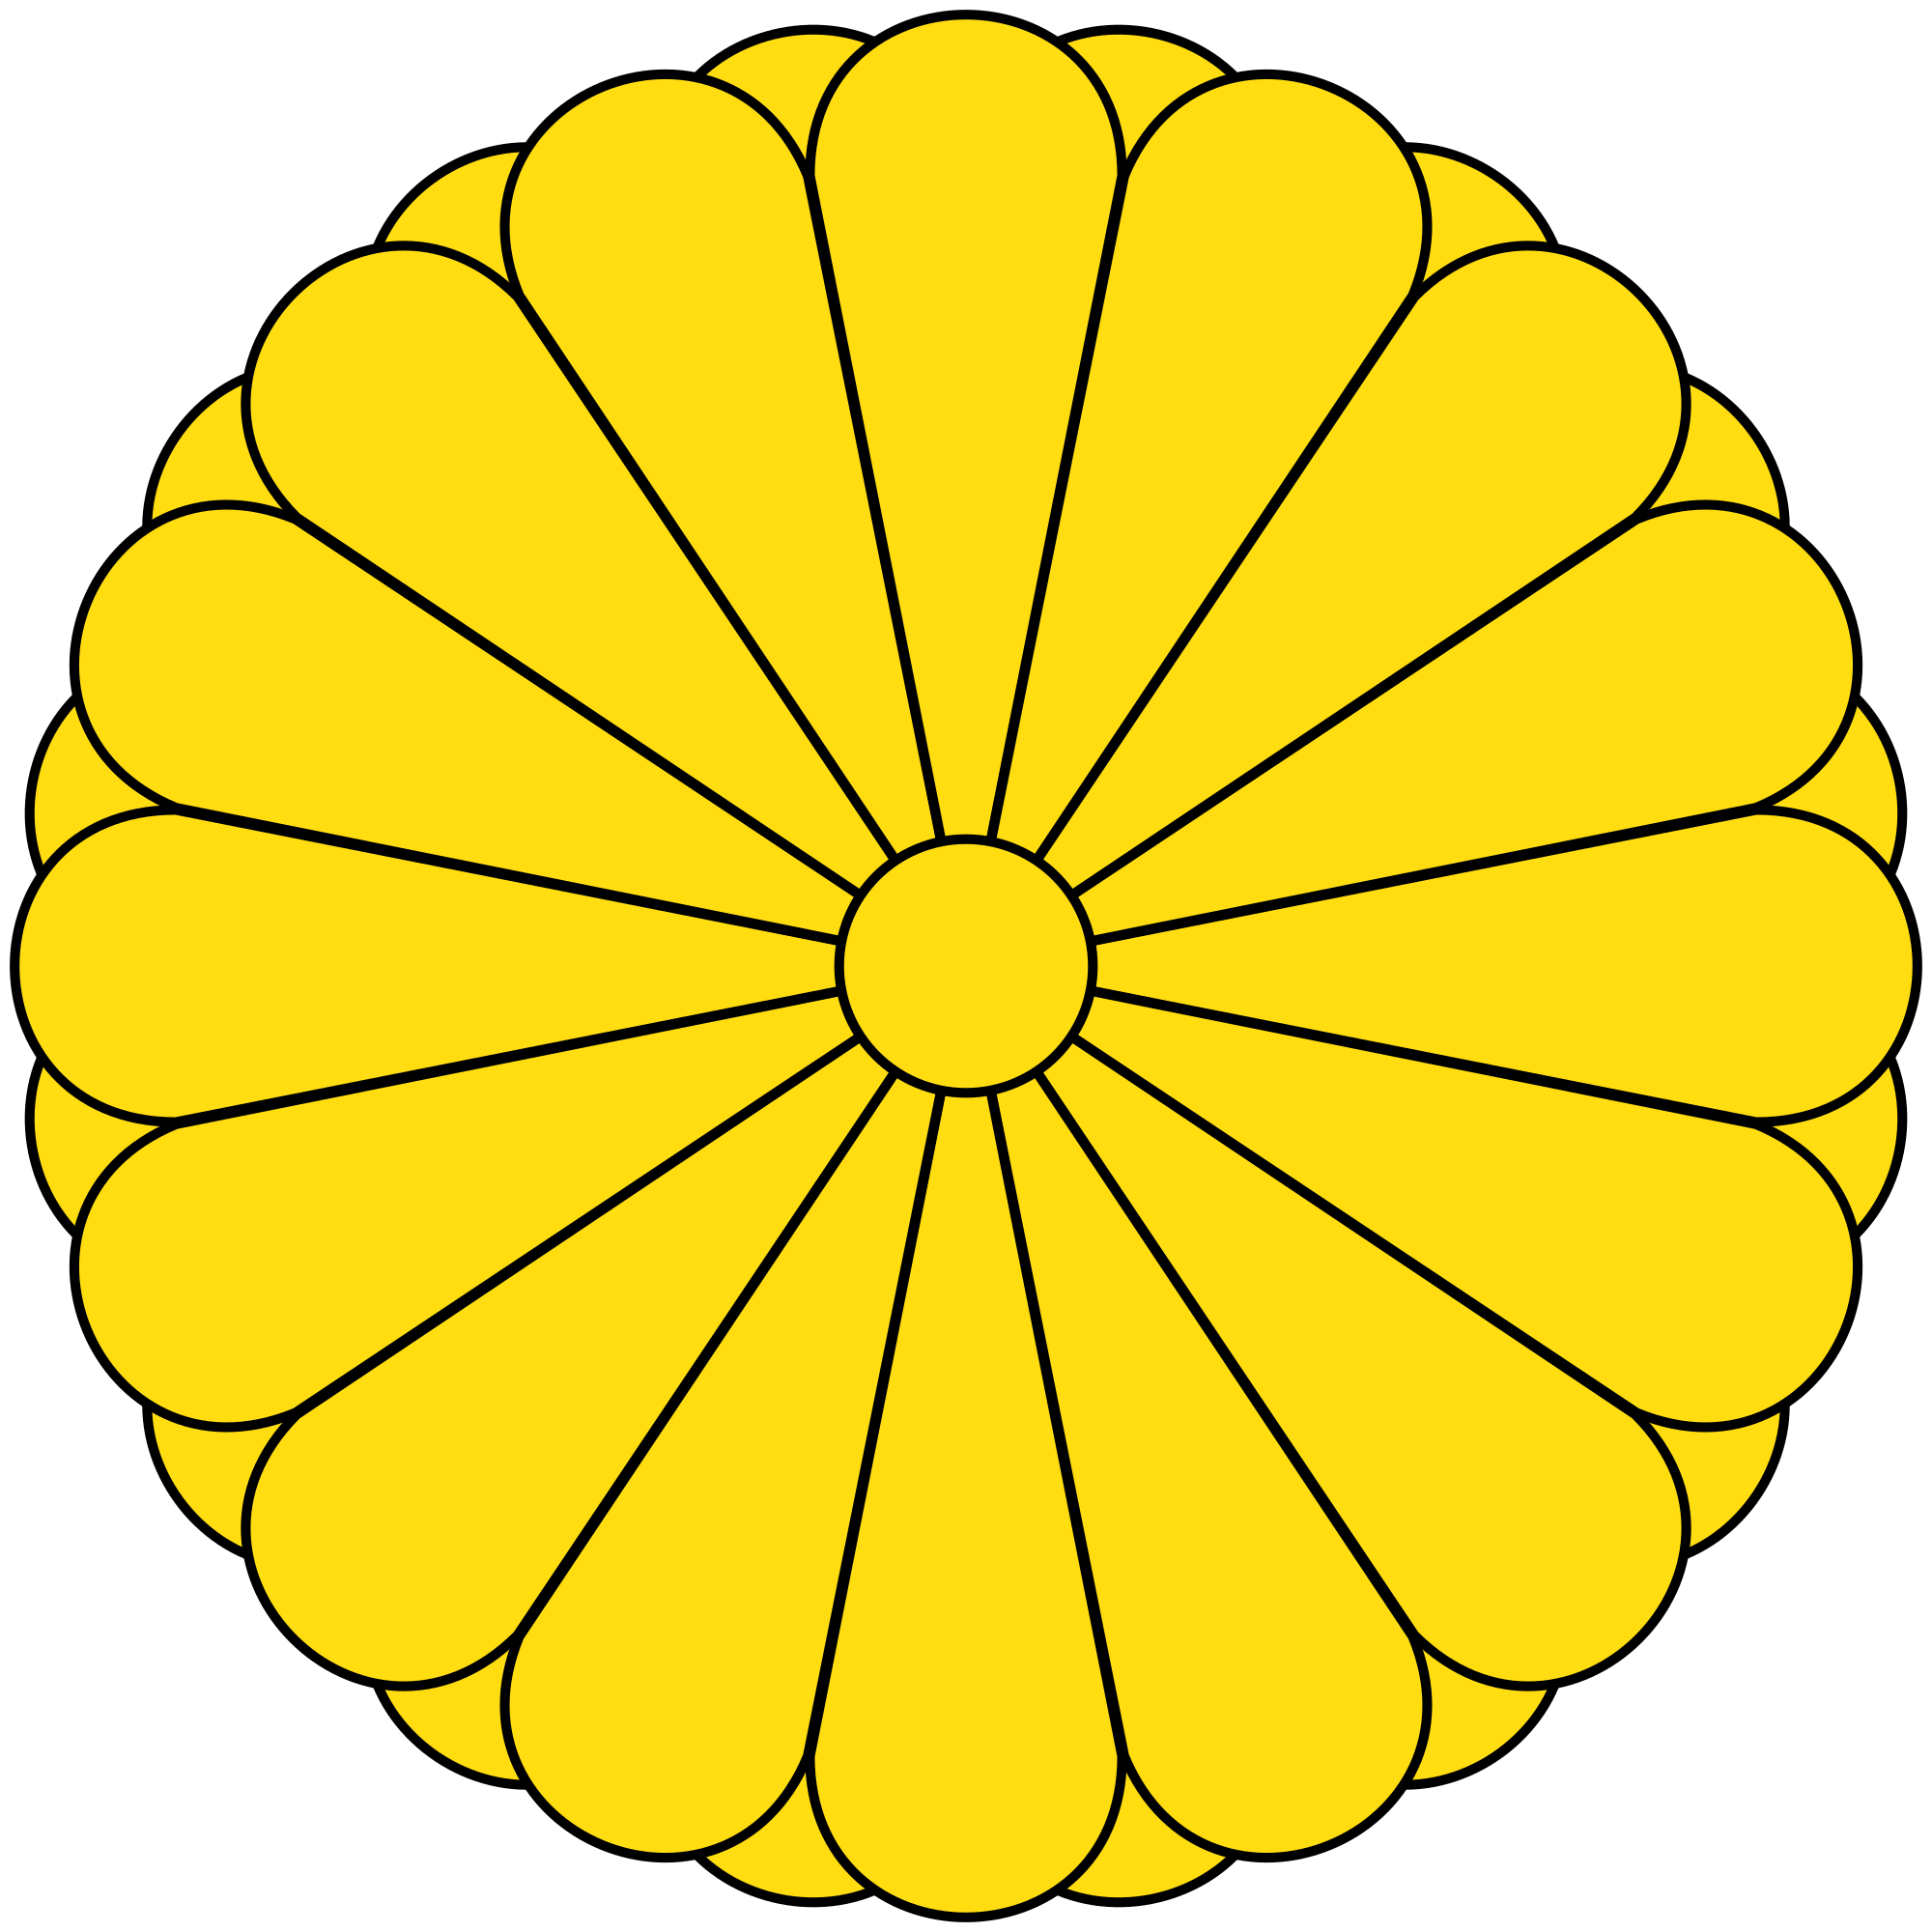 File:Imperial Seal of Japan.svg - Wikimedia Commons